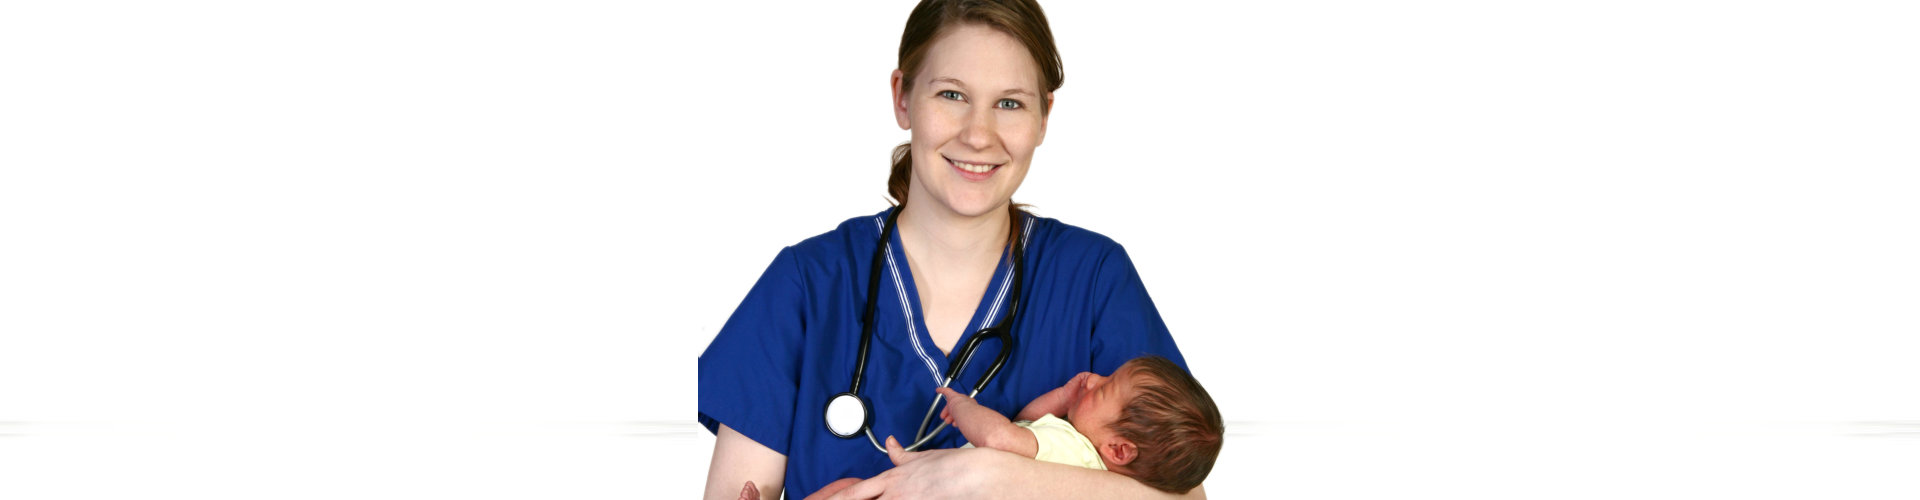 lady healthcare staff holding the newborn baby